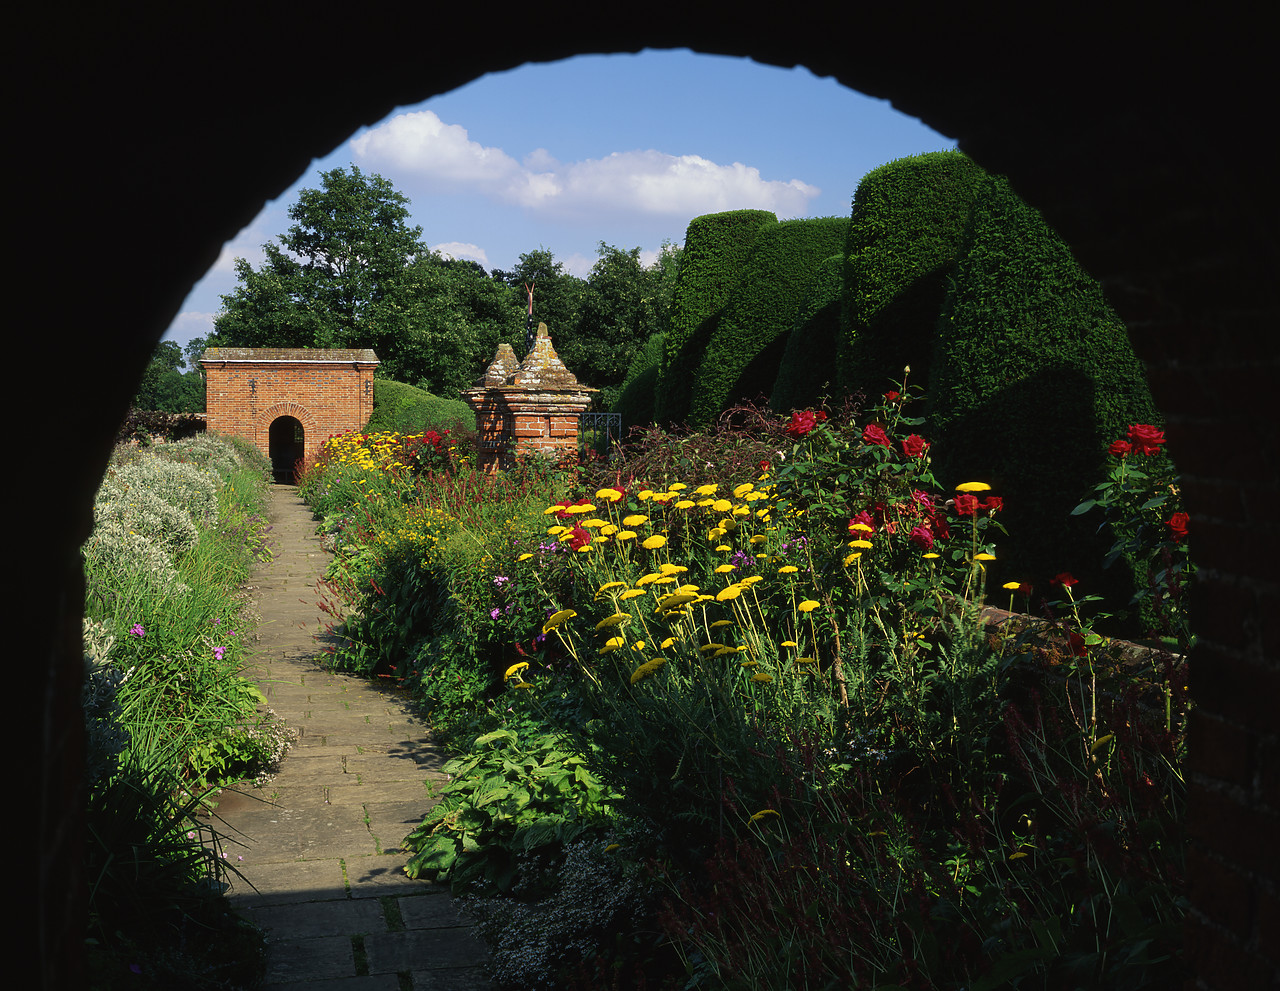 #200458-1 - View of Garden through Arch, Packwood House, Lapworth, Warwickshire, England